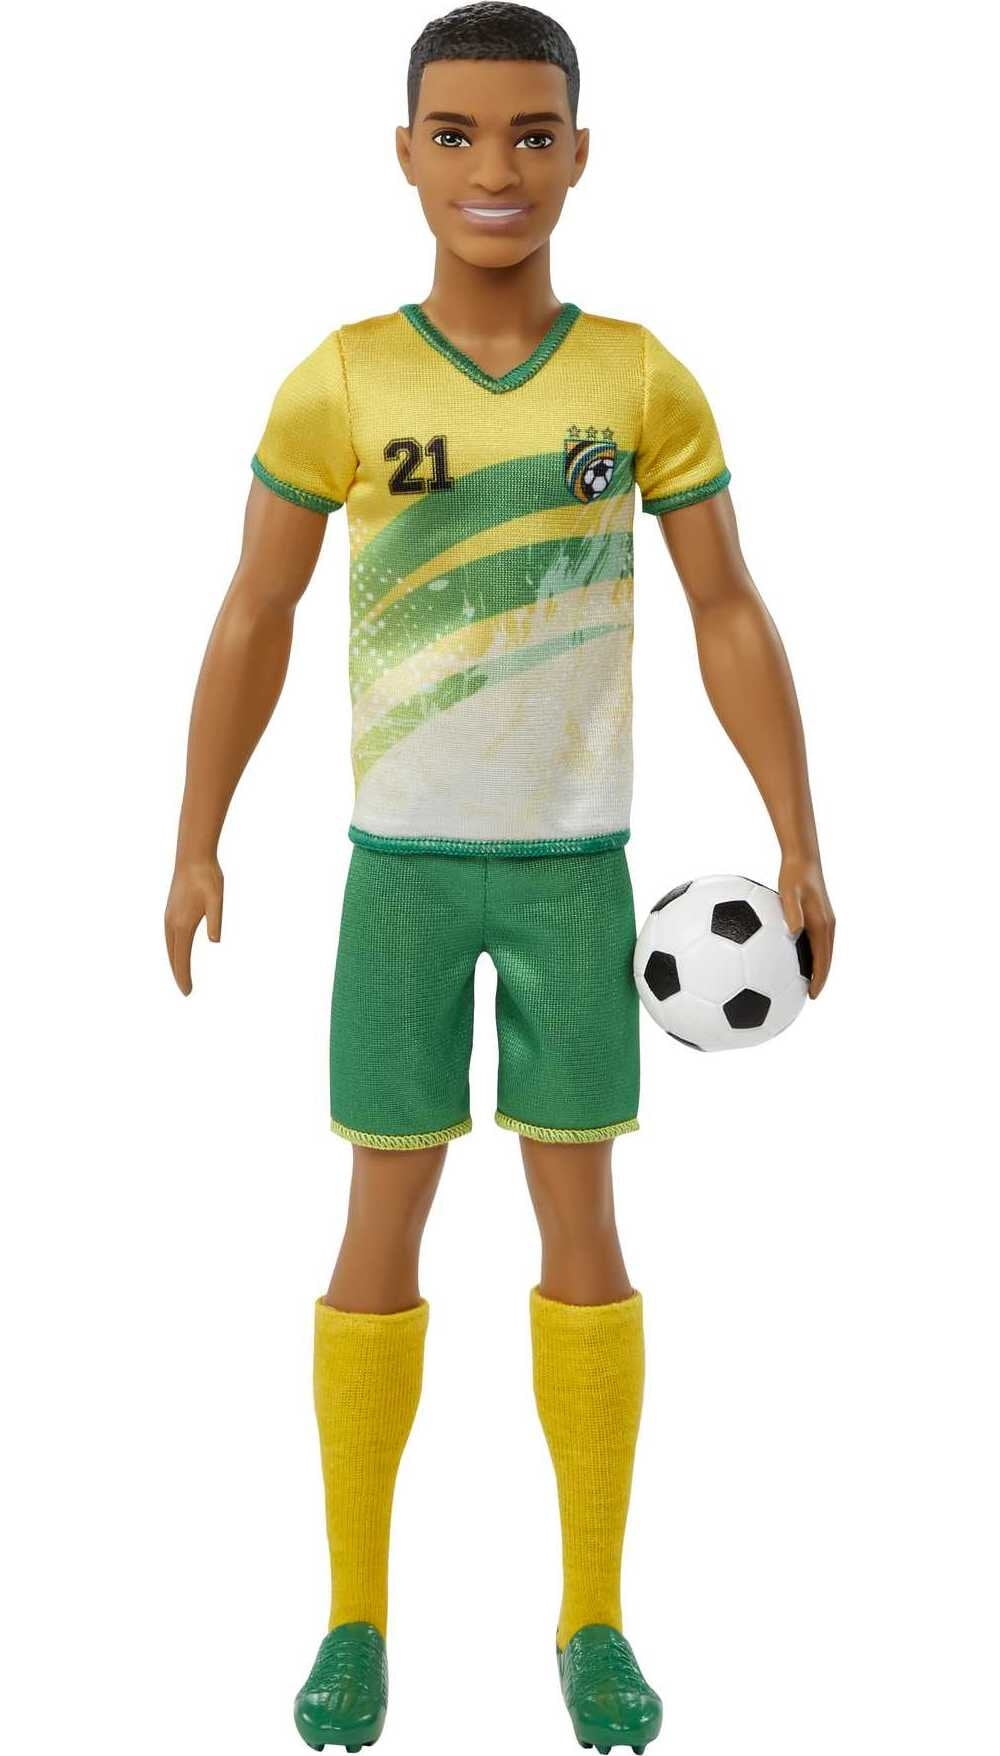 Barbie Soccer Ken Doll Dressed in Cleats, Colorful #21 Uniform & Tall Socks with Short Cropped Hair